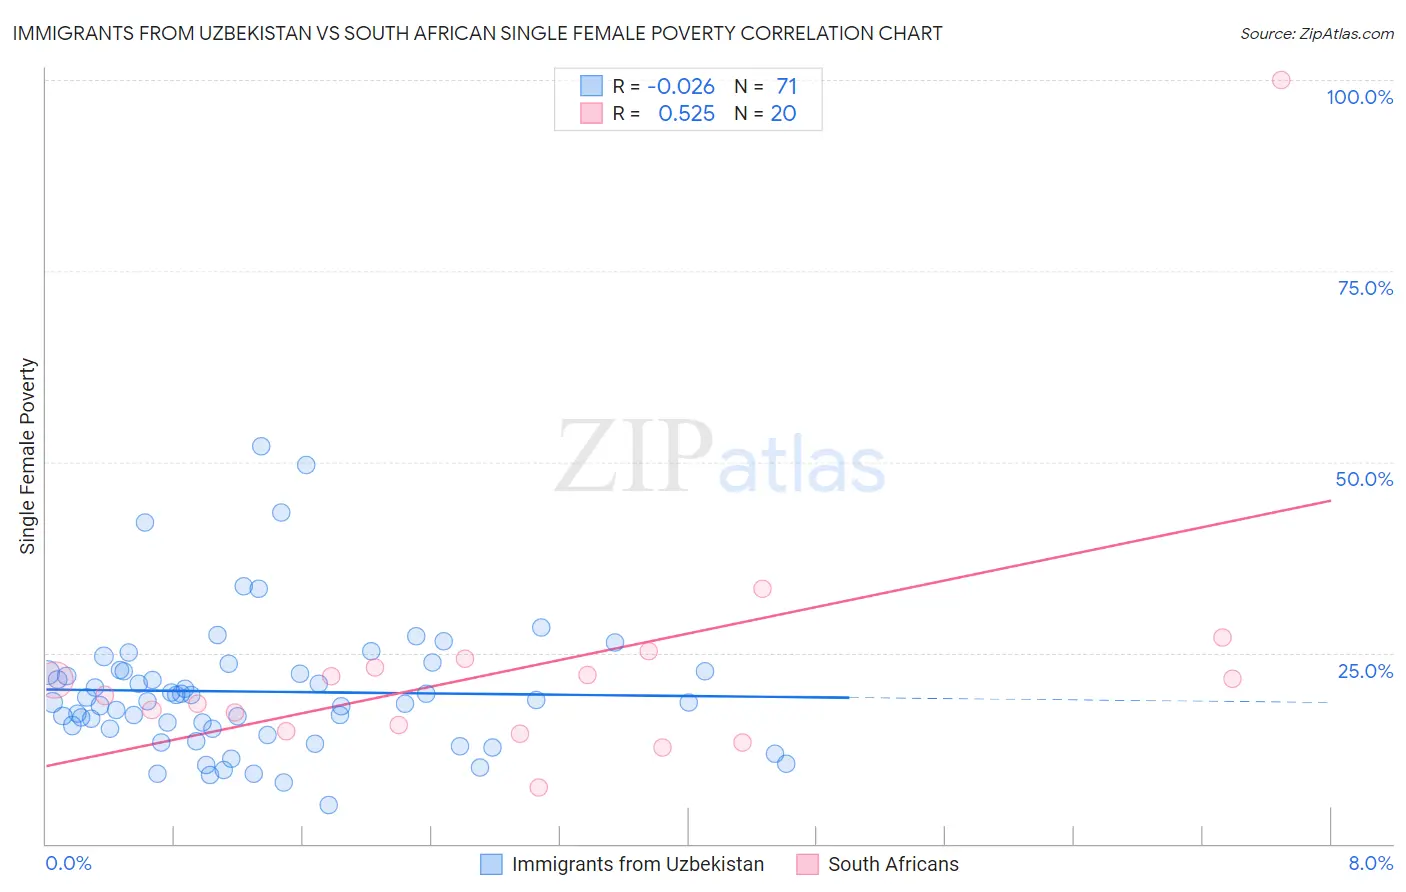 Immigrants from Uzbekistan vs South African Single Female Poverty